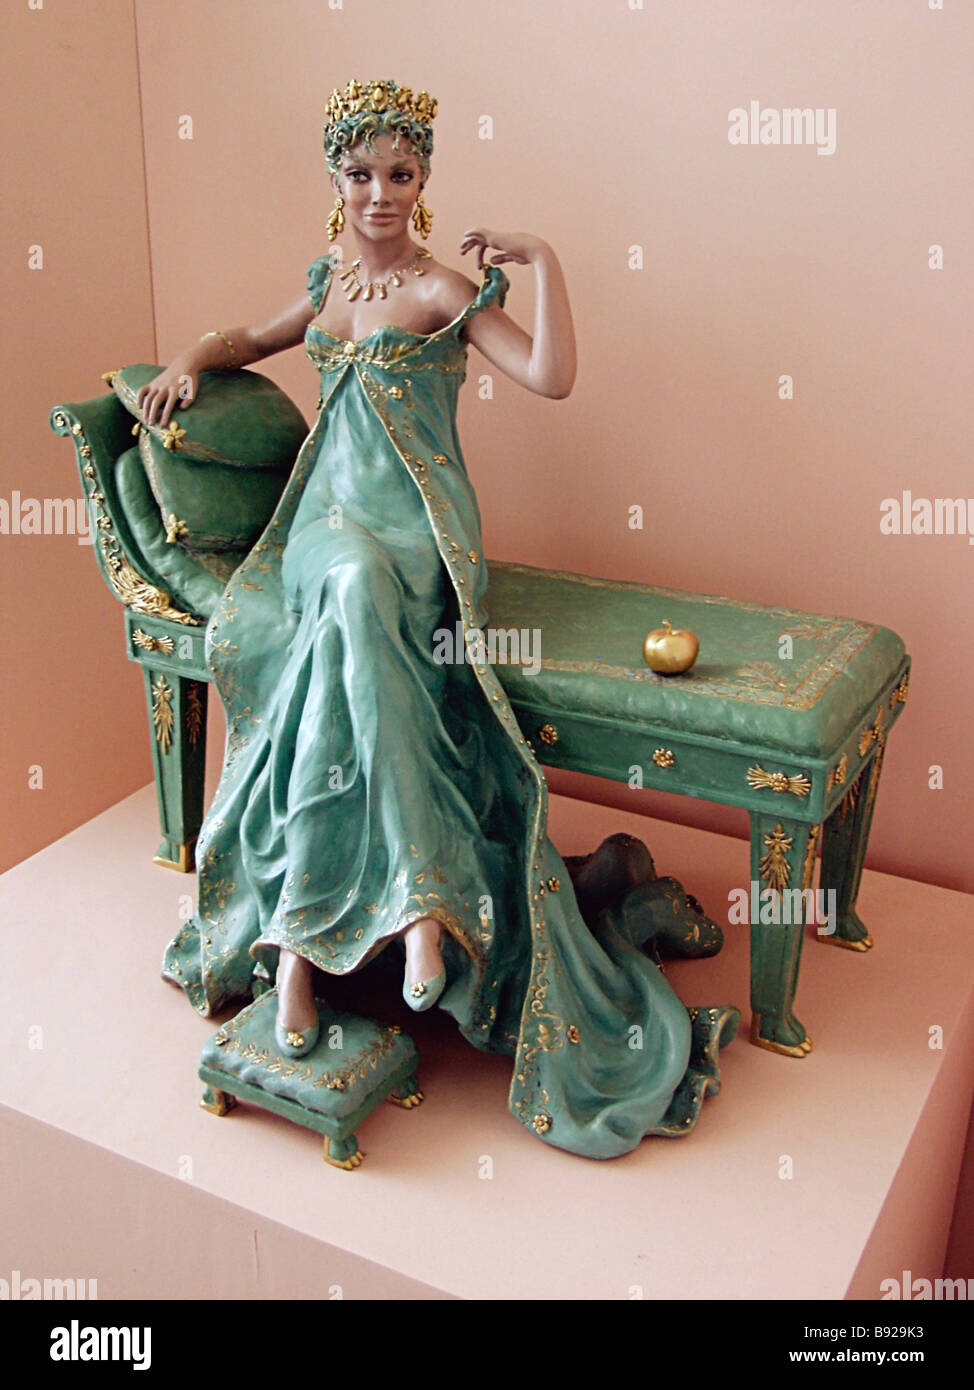 Sculpture by Italian movie star Gina Lollobrigida on display at the Pushkin  Fine Arts Museum during the Twenty Fifth Moscow Stock Photo - Alamy